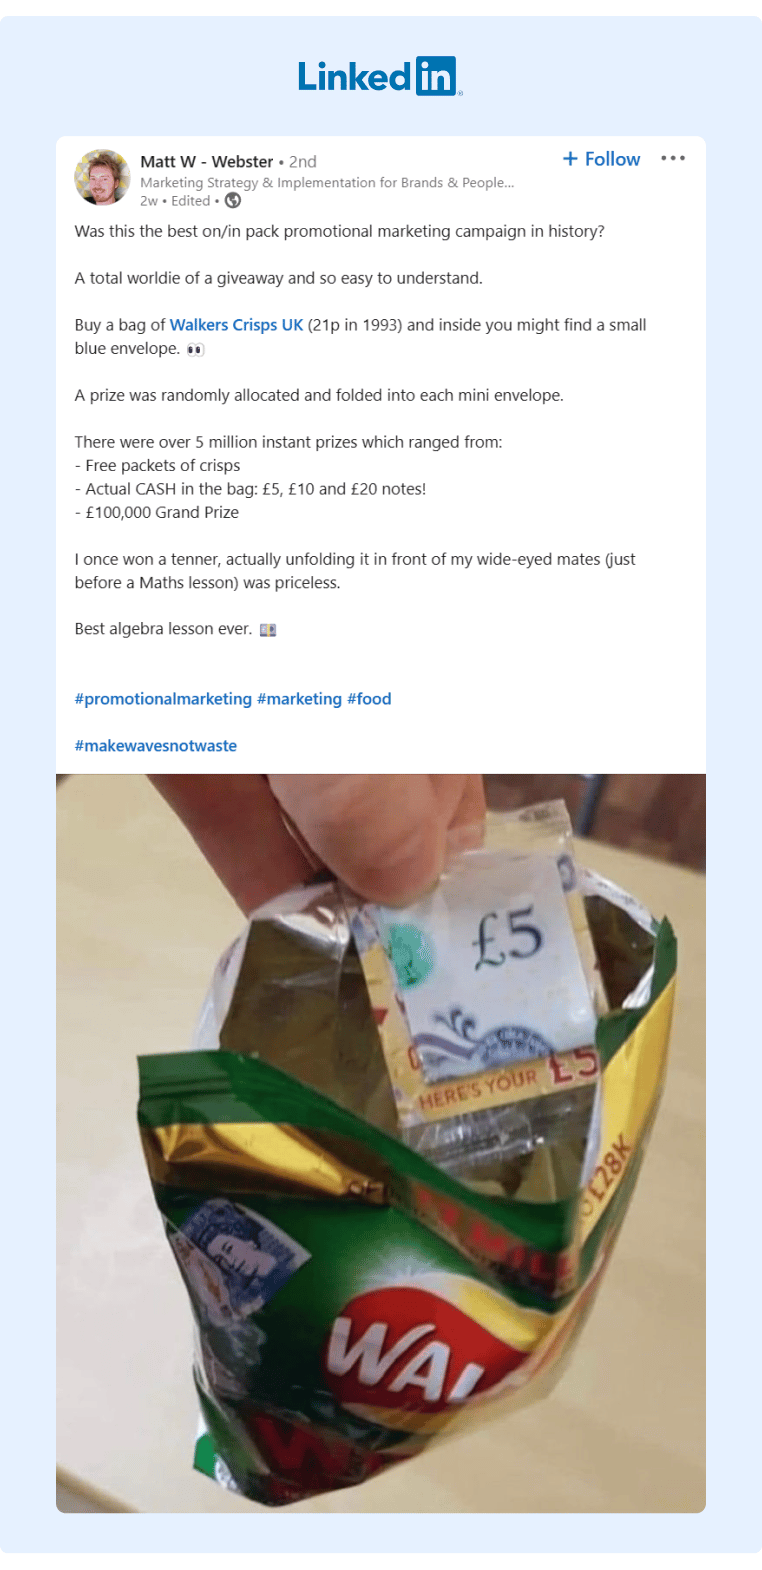 LinkedIn post where the author describes a promotion ran by Walkers Crisps and how he won a prize one time